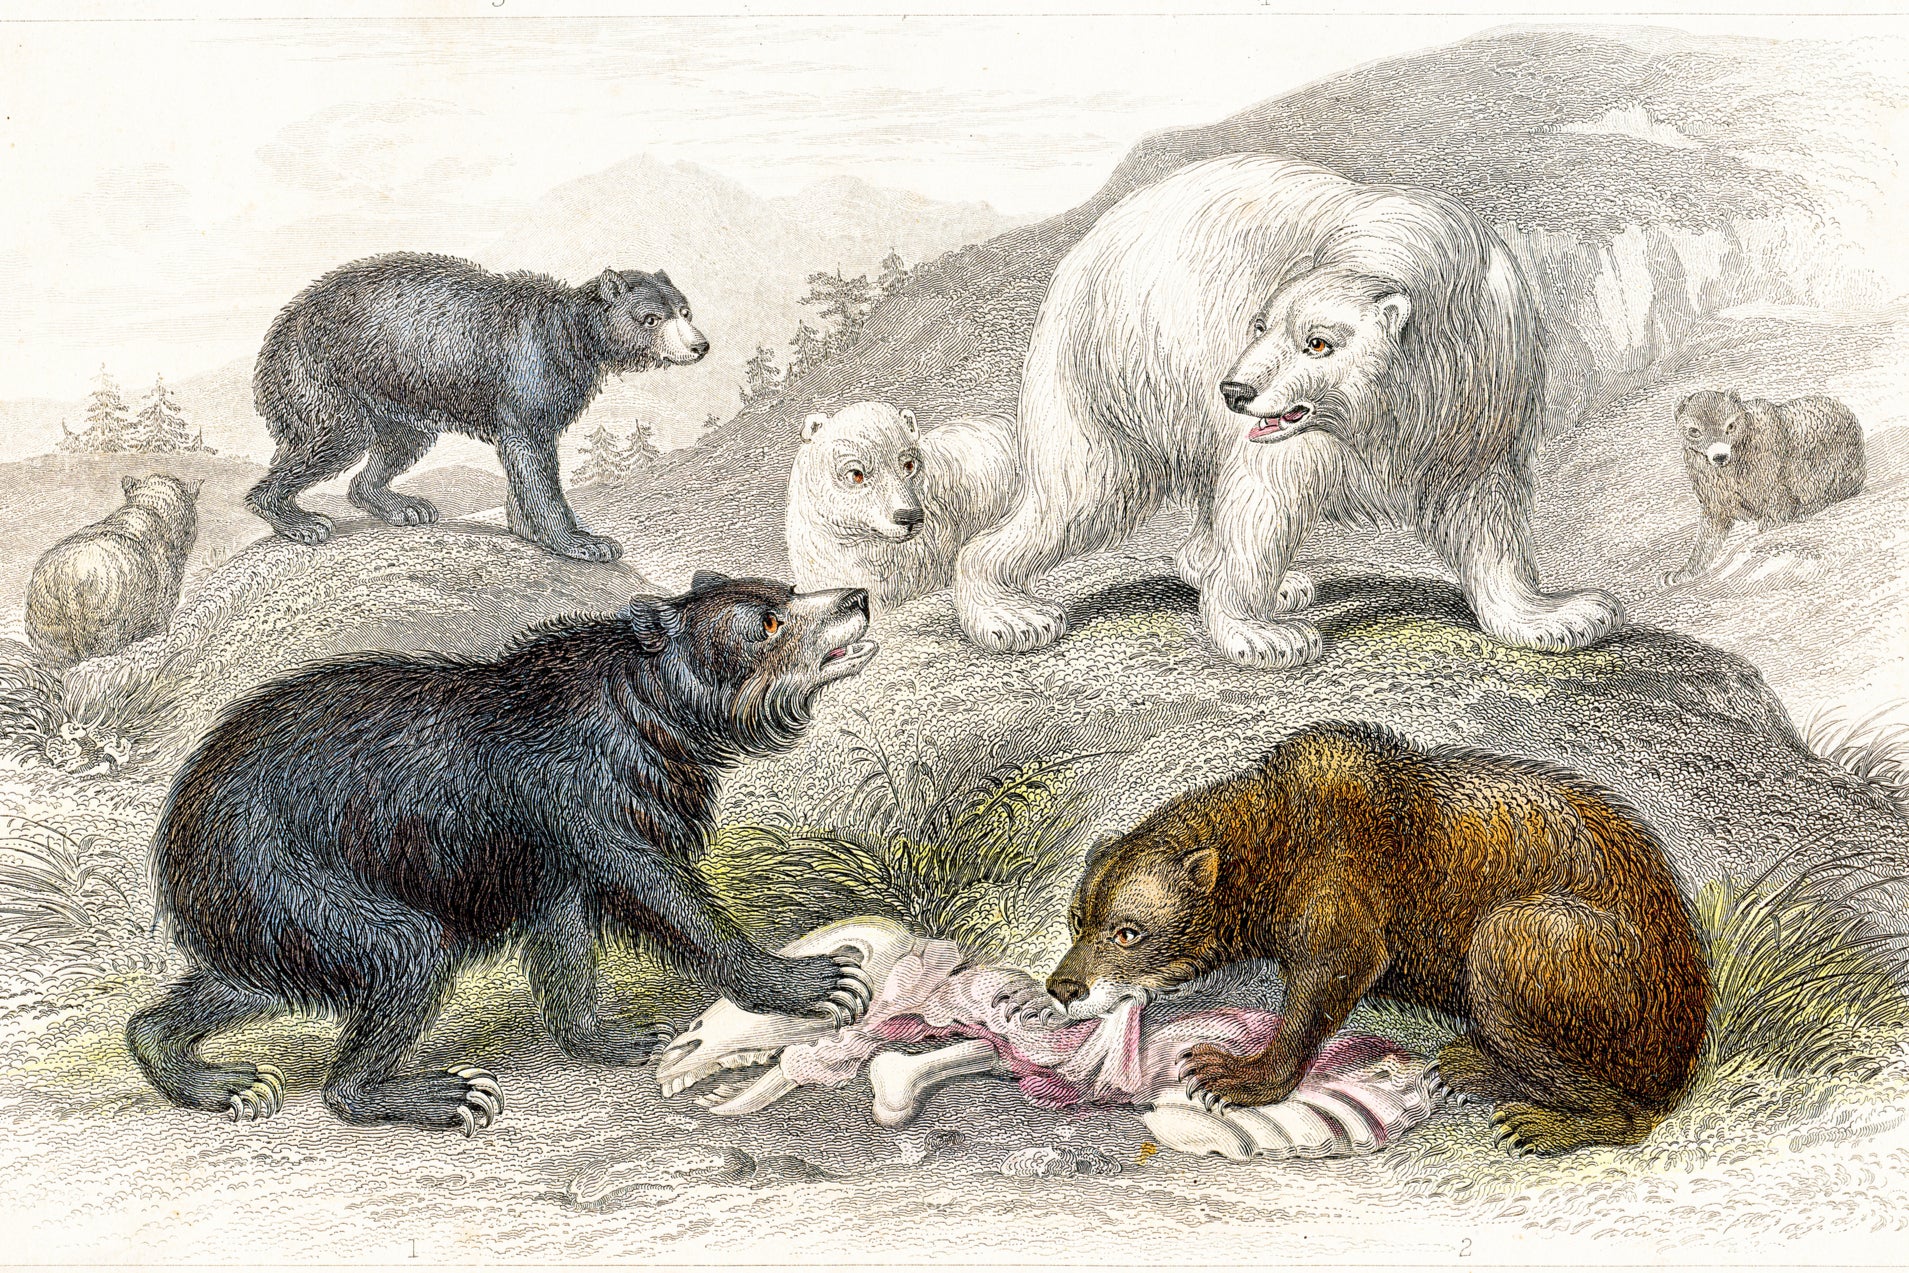 A so-called grisly bear (top left) does its best to look fearsome